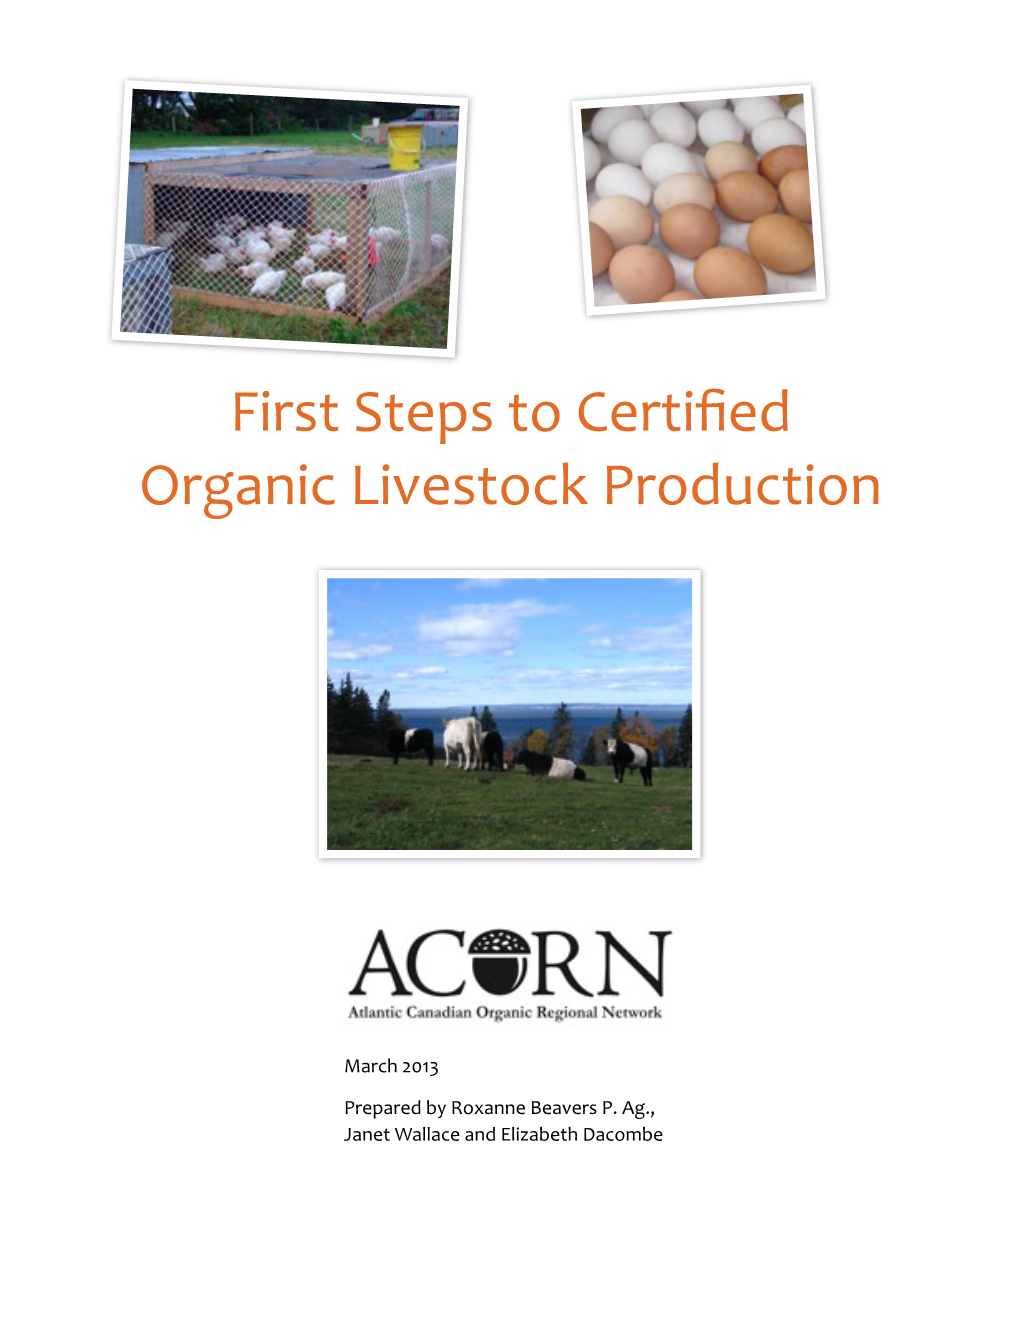 First Steps to Certified Organic Livestock Production